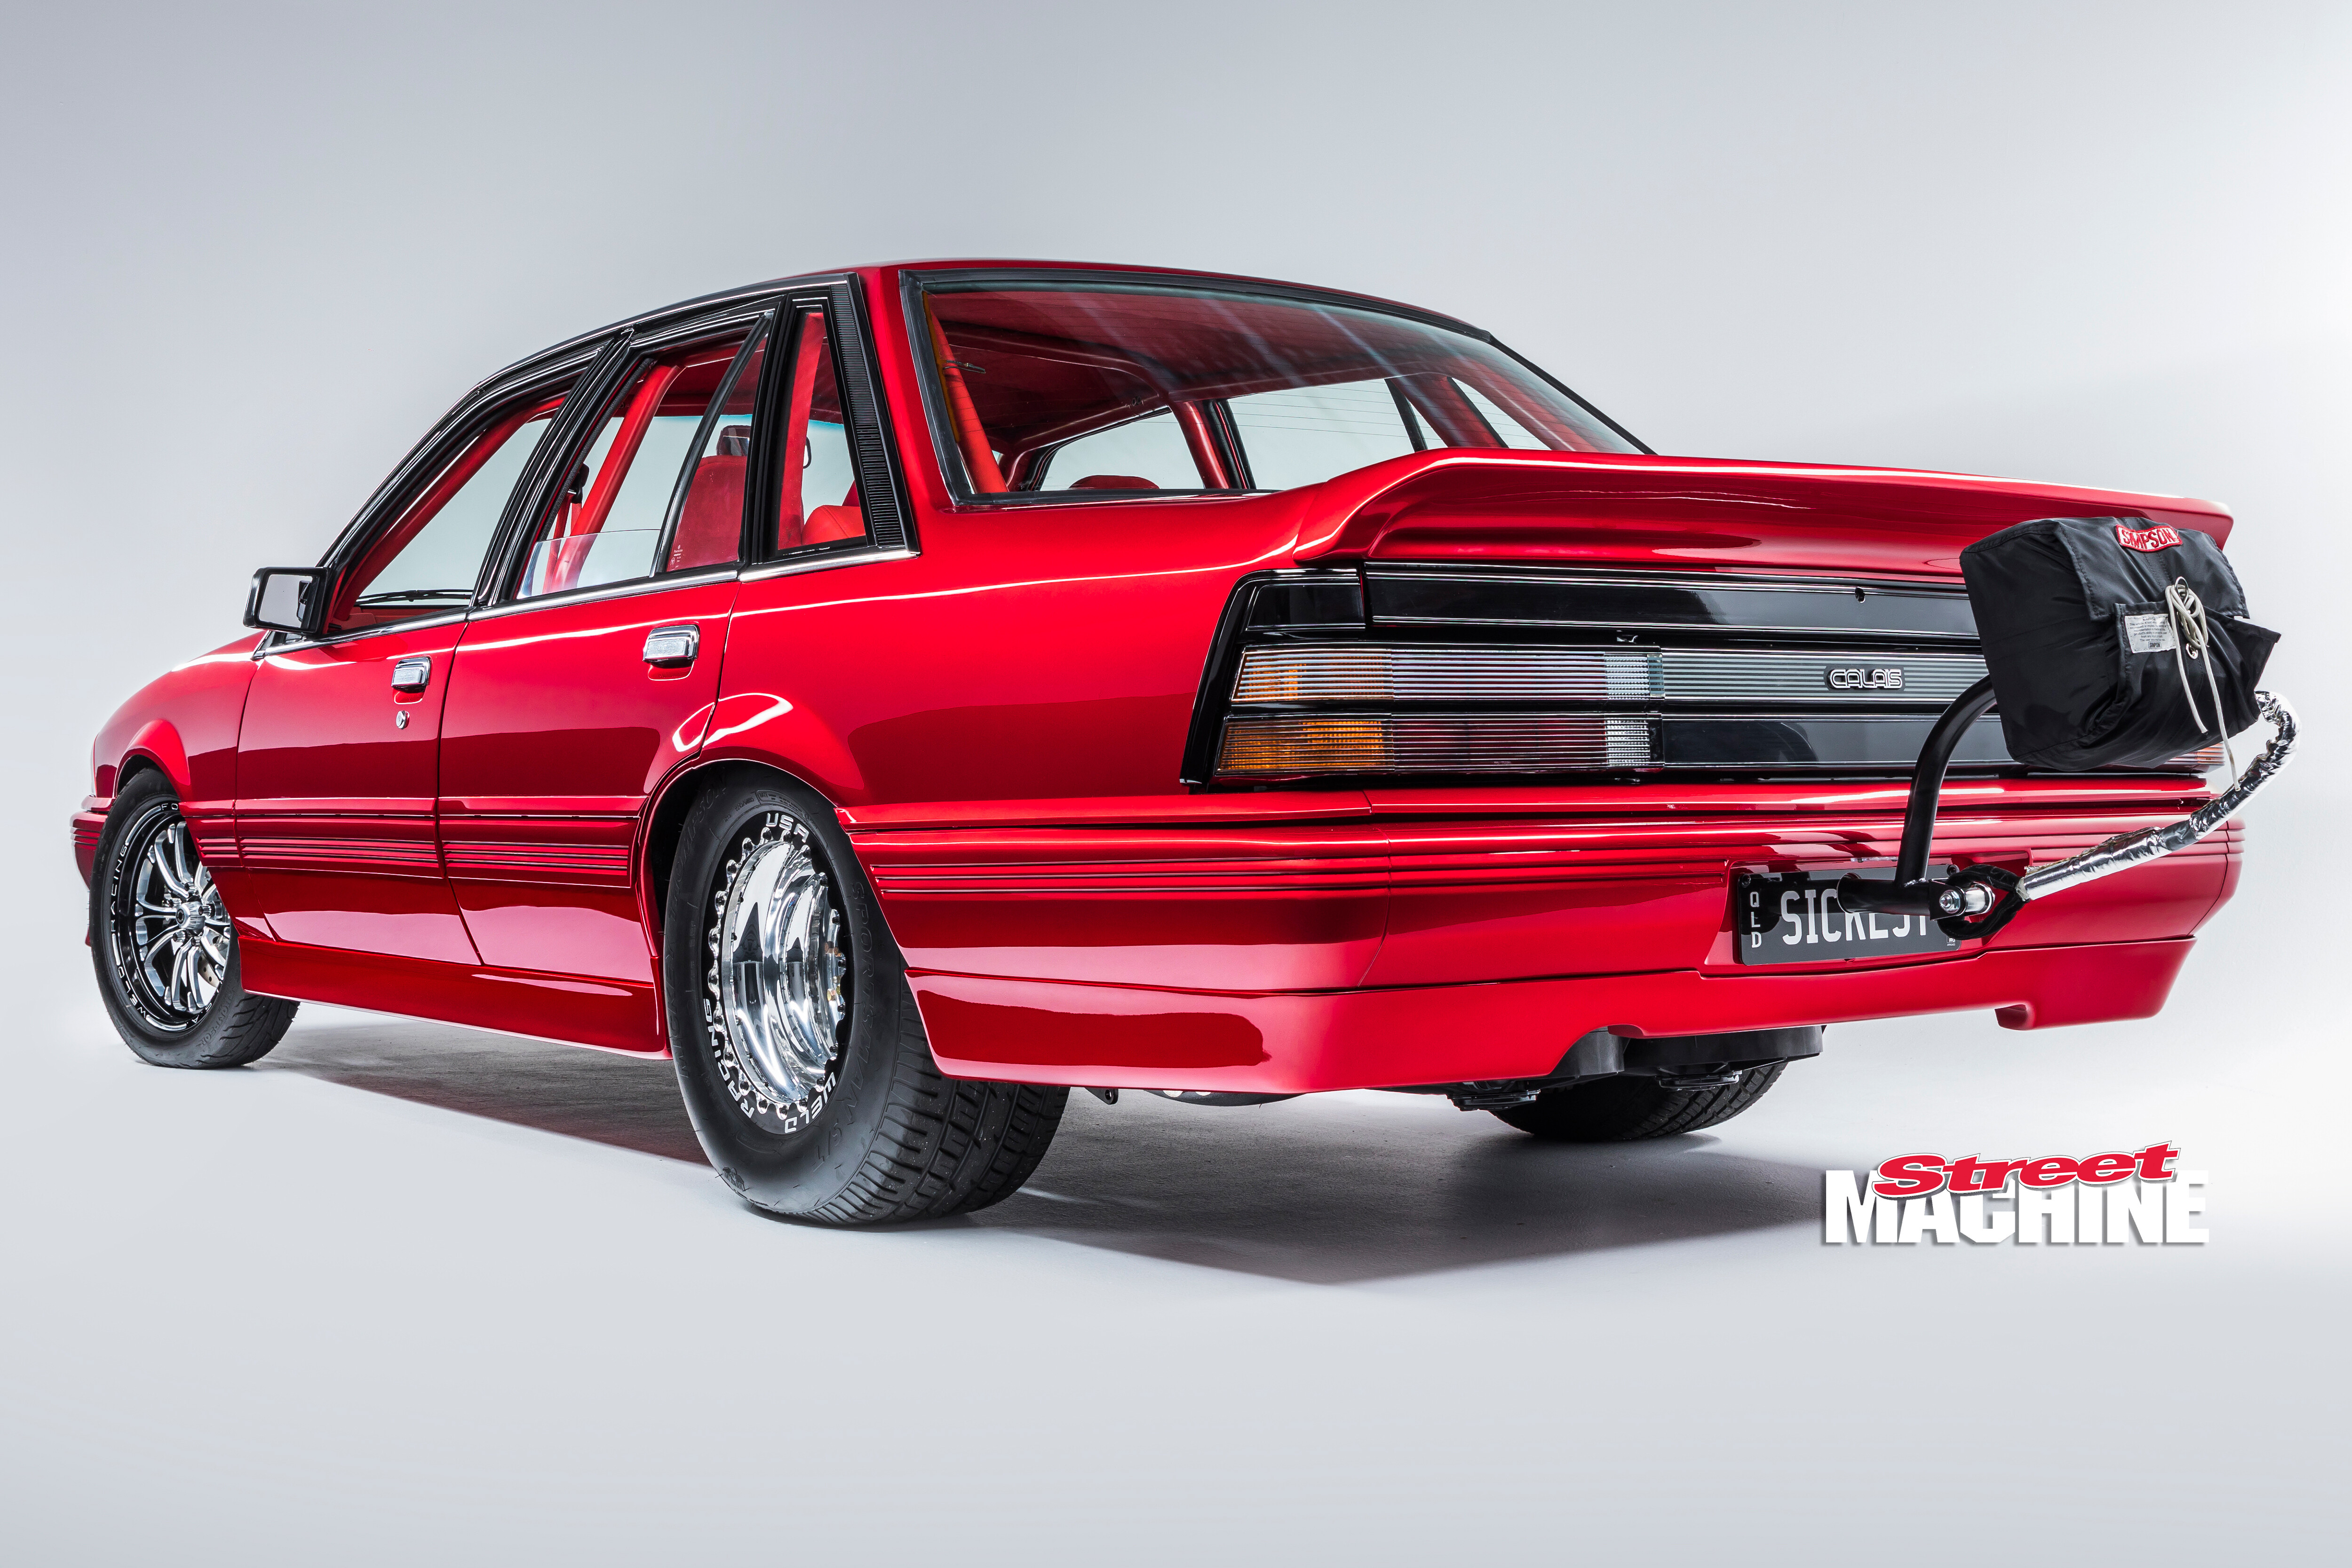 Street Machine Features Billy Shelton Holden Vl Commodore Rear Angle